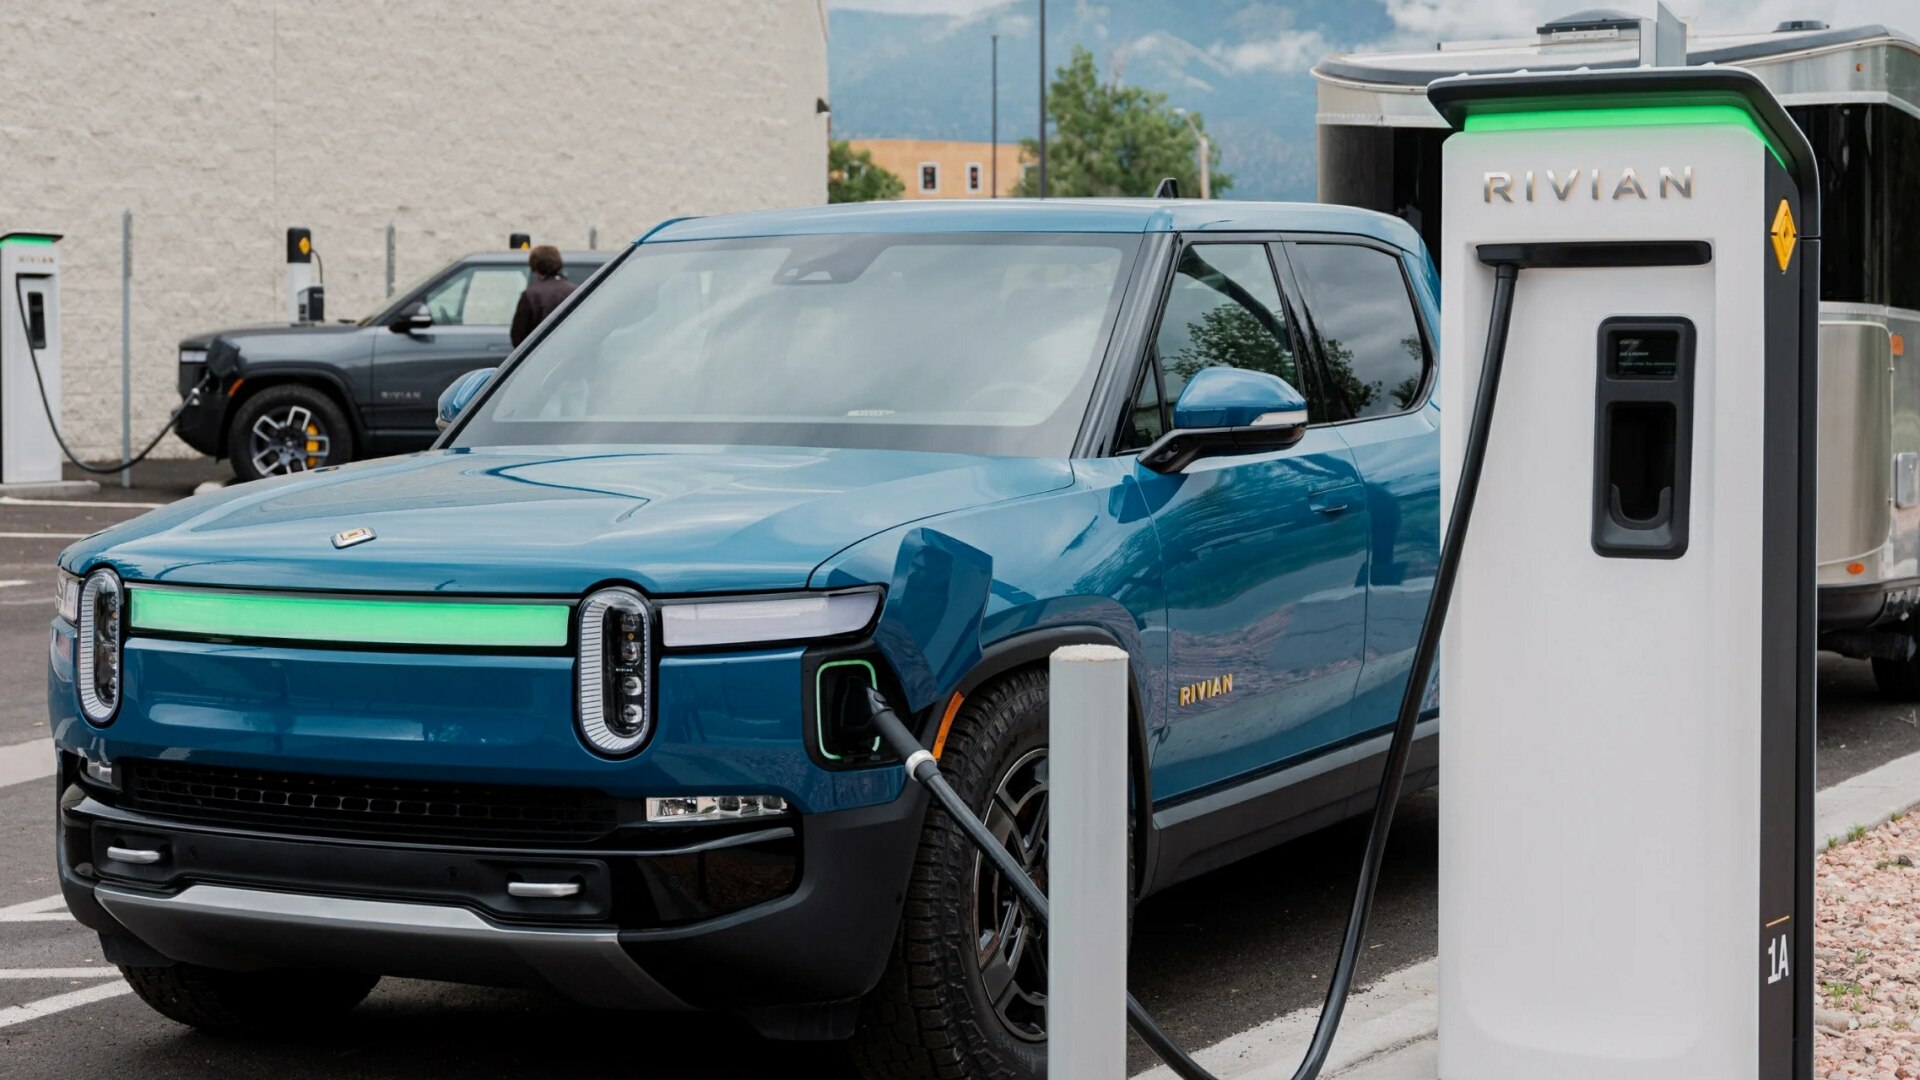 Featuring The CCS Plug And Fast Charger Of The Rivian Adventure Network (Credits Rivian)